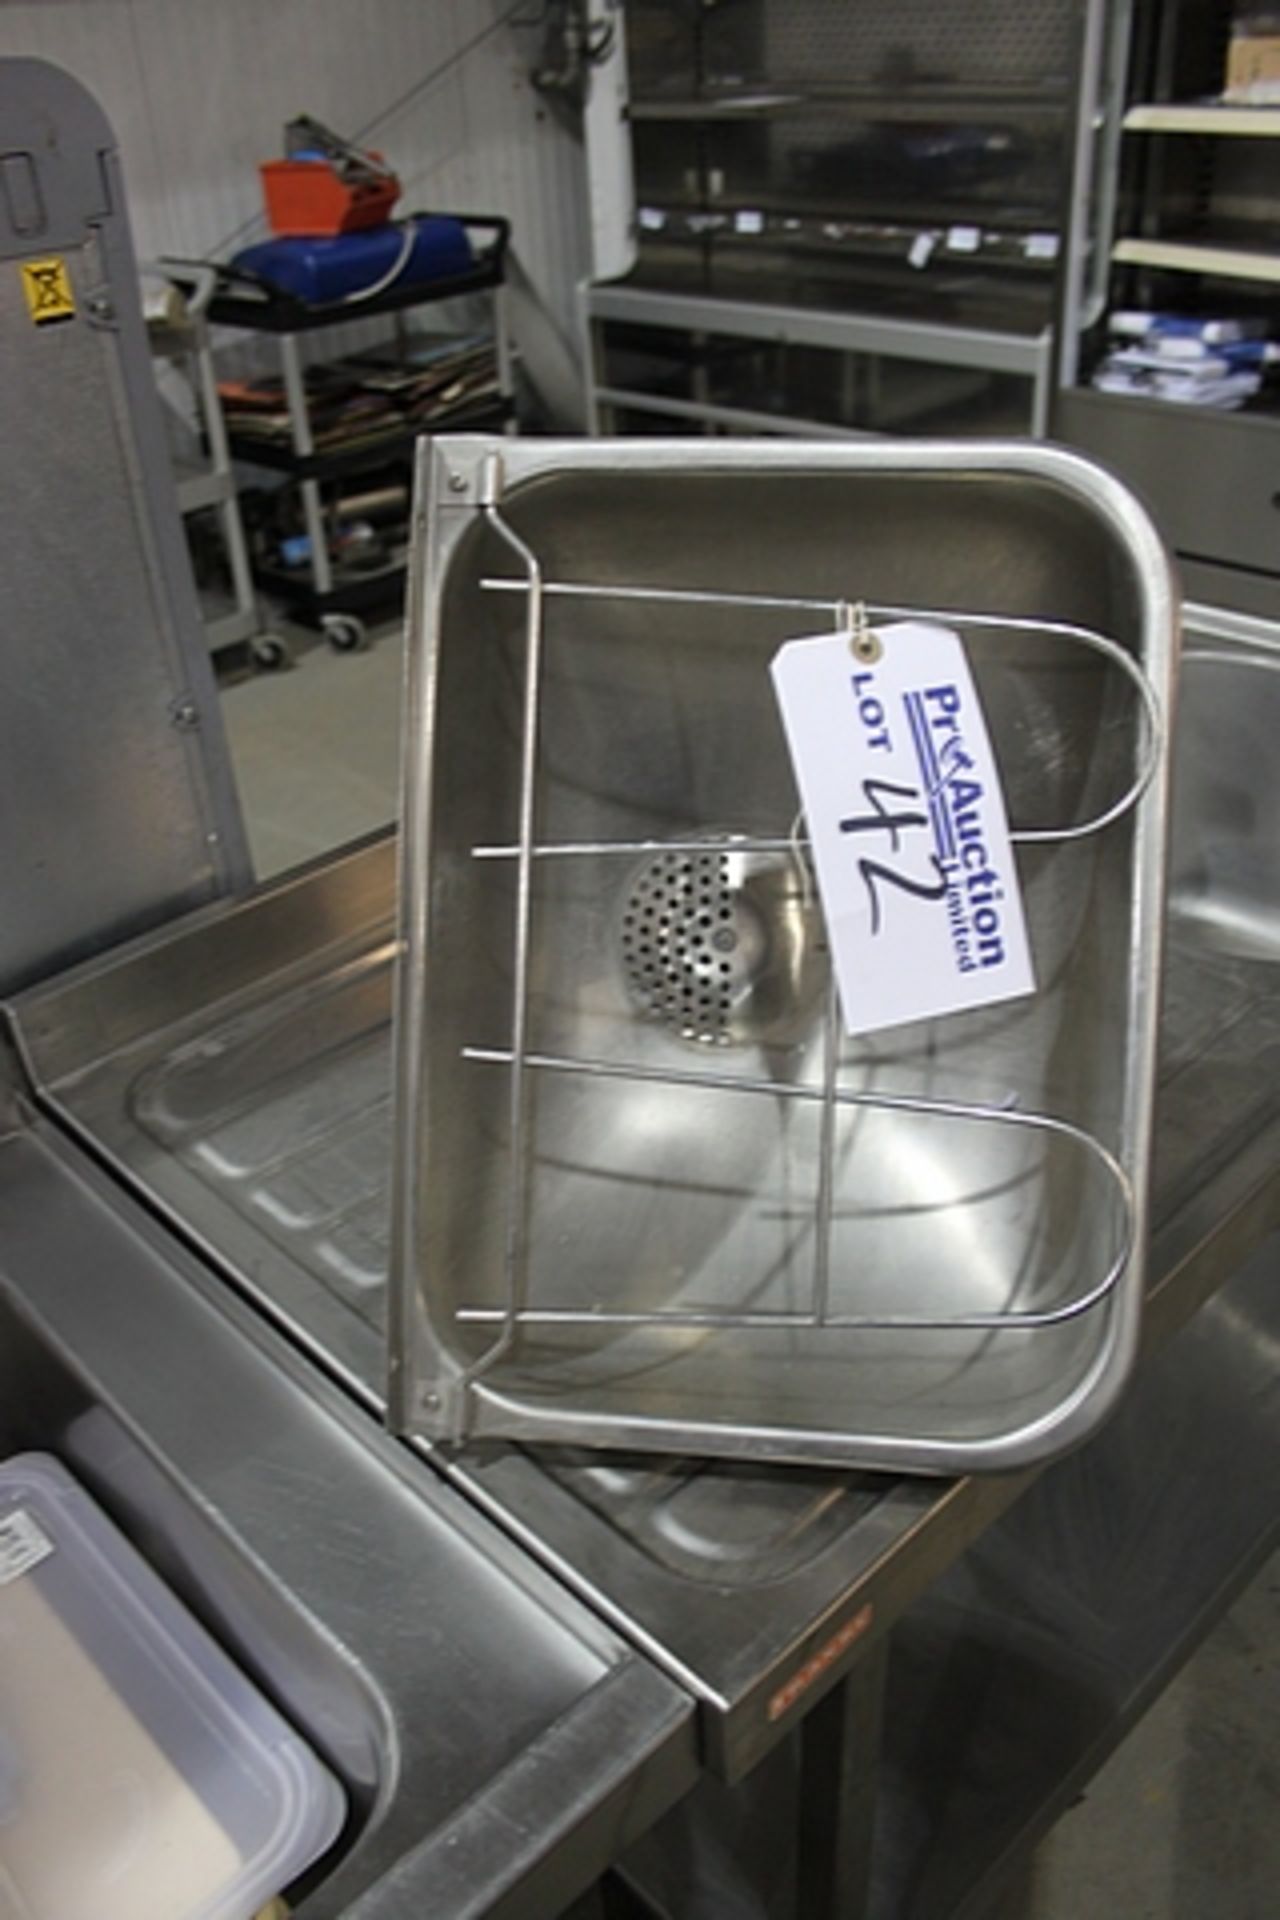 Stainless steel wall mounted janitors sink